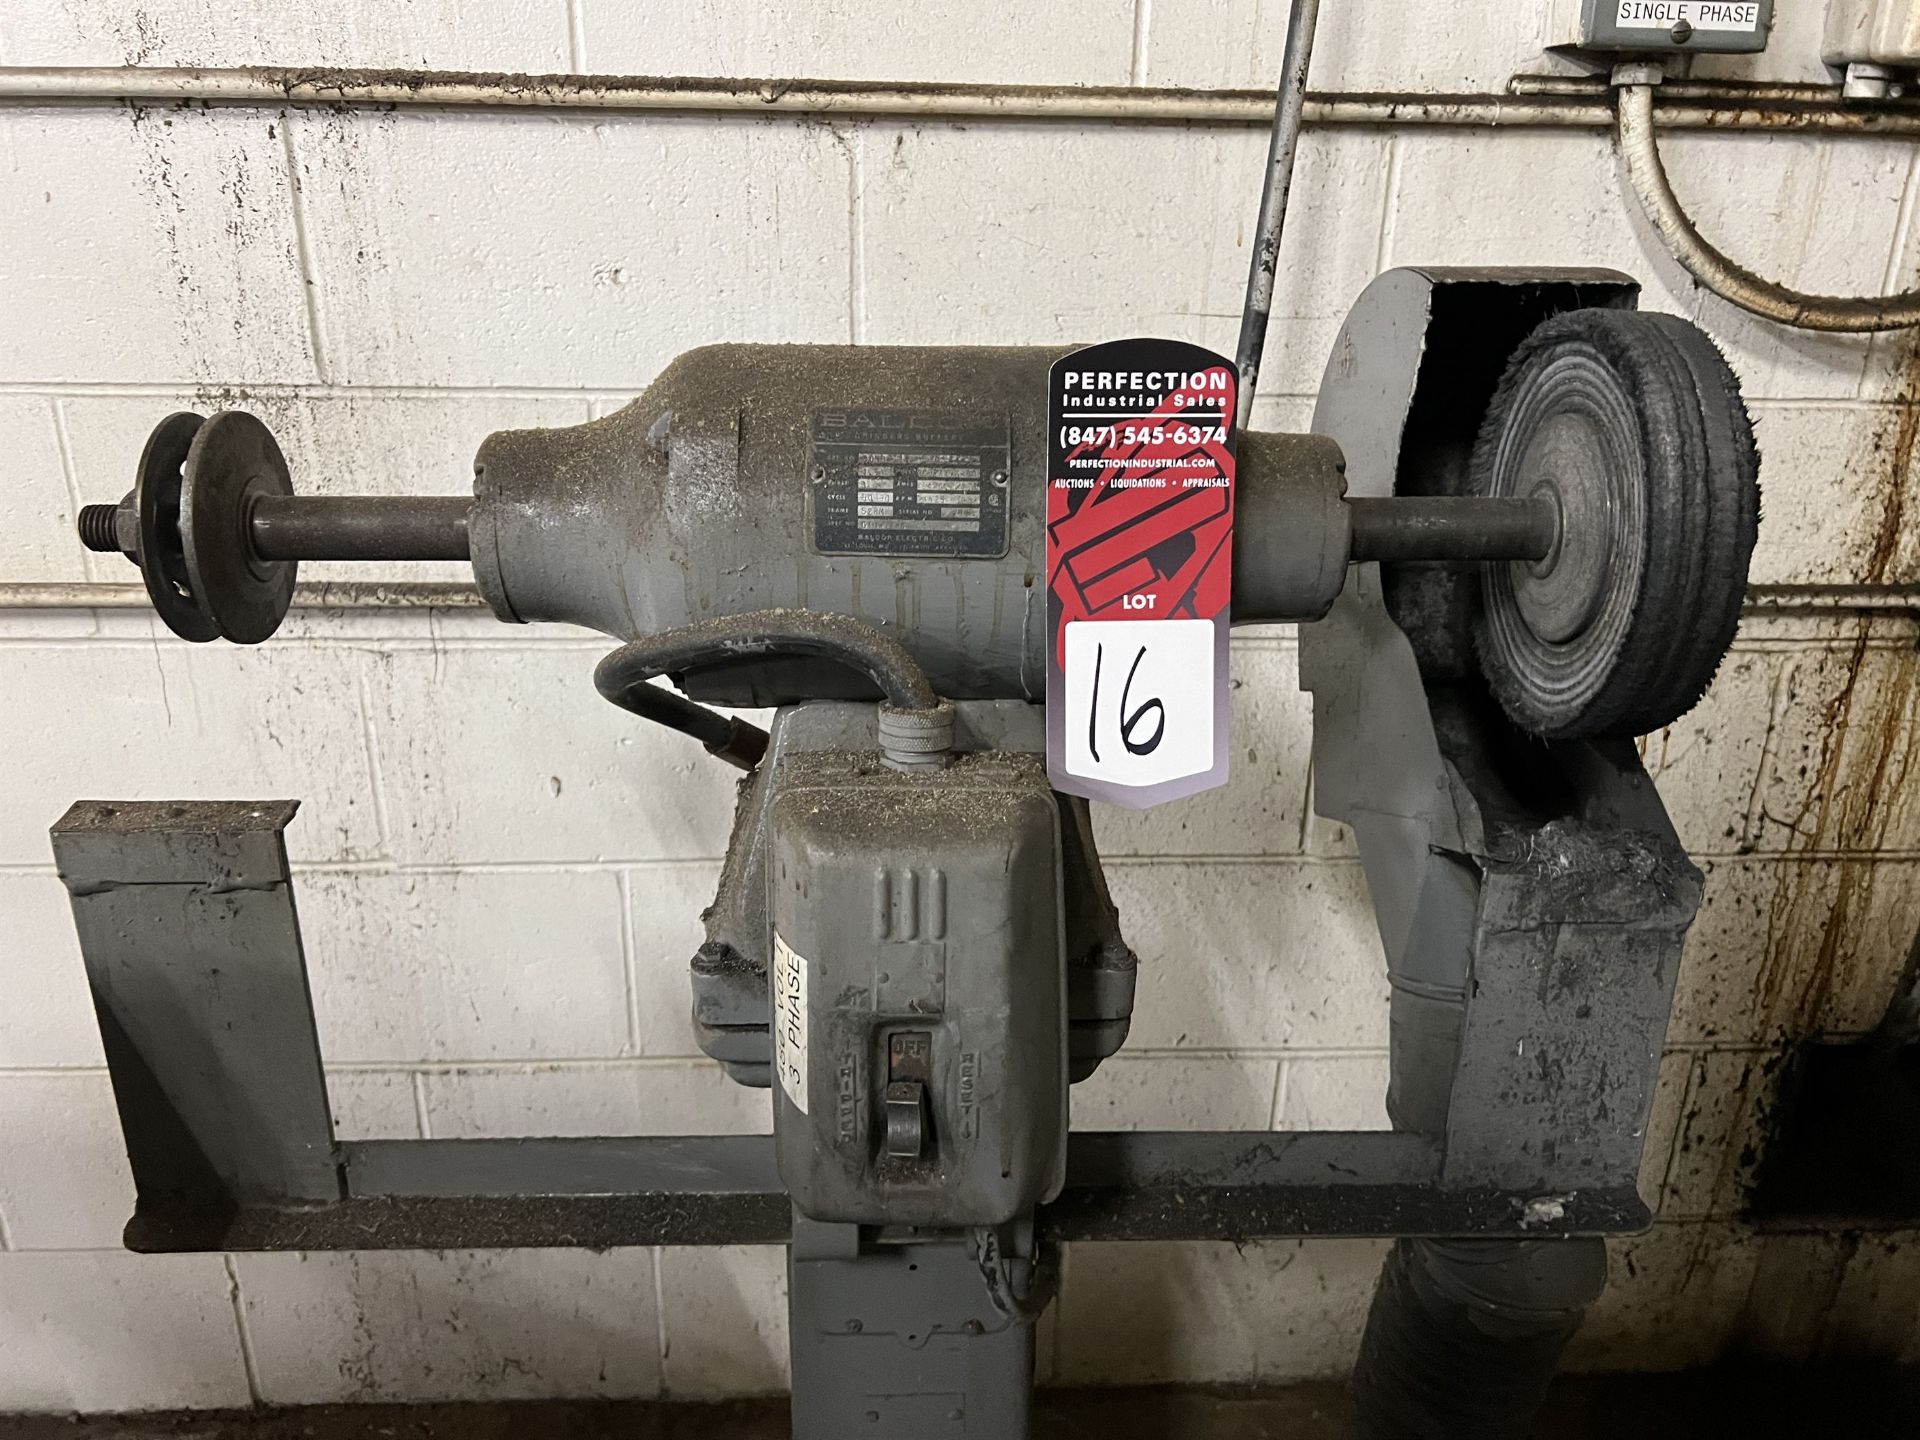 BALDOR 409B Dual End Pedestal Grinder, 1-1/2 HP (This lot is located at 1935 W. Lusher Avenue, - Image 2 of 4